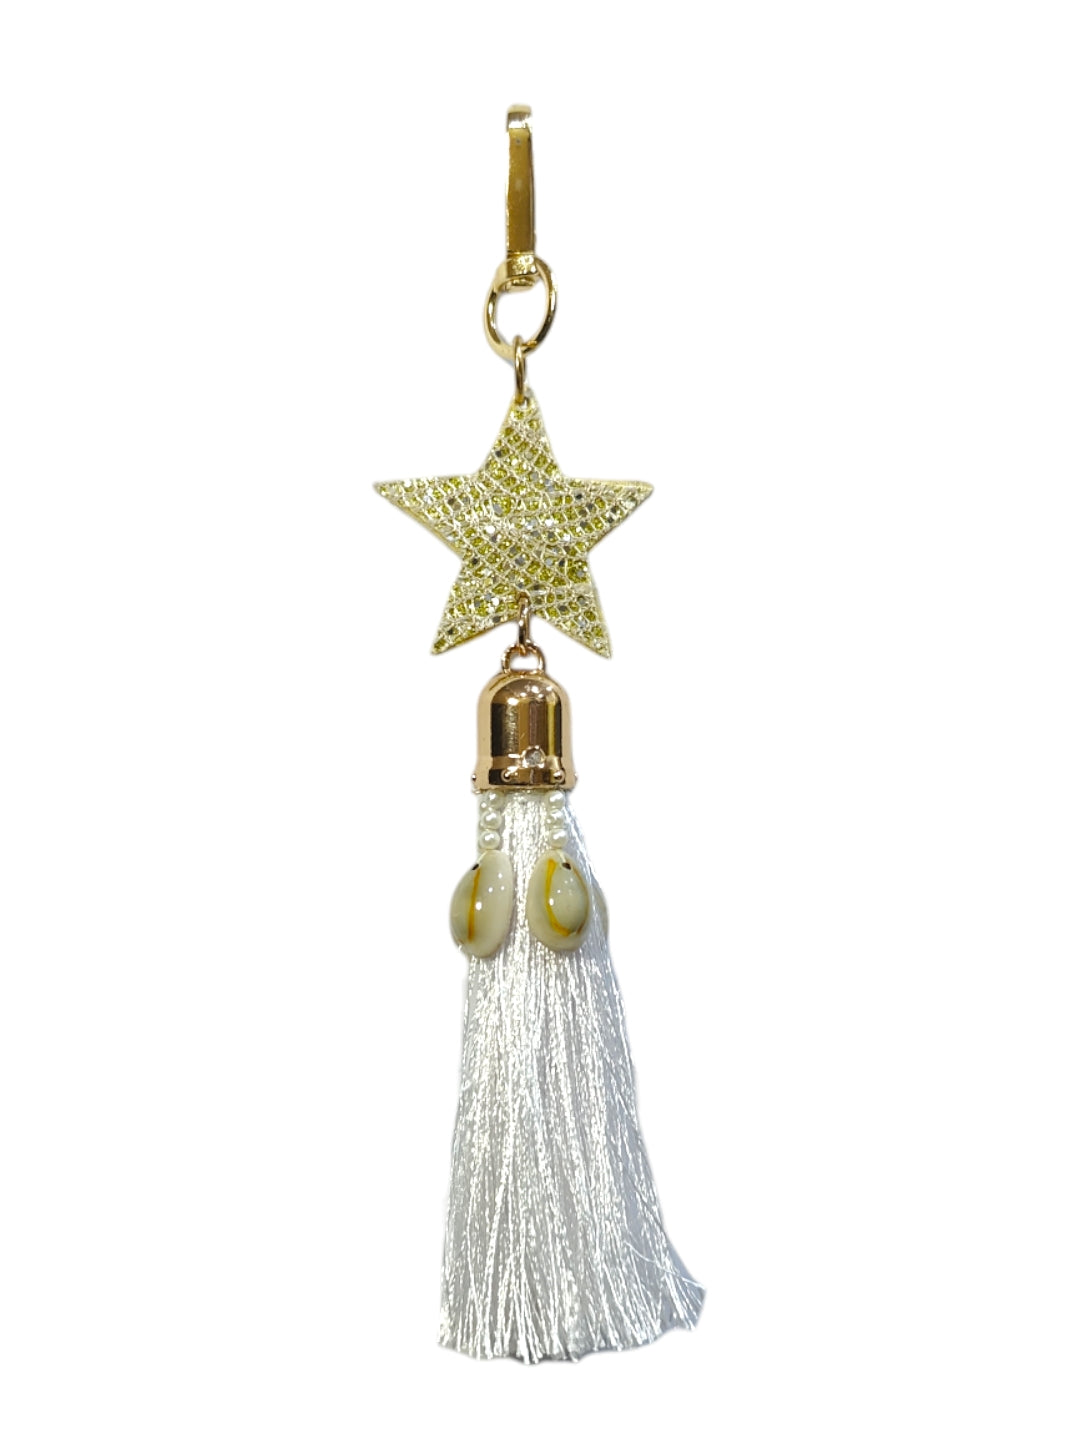 A white star tassel bag charm is a stylish accessory designed to add a touch of flair and personality to any handbag or purse.